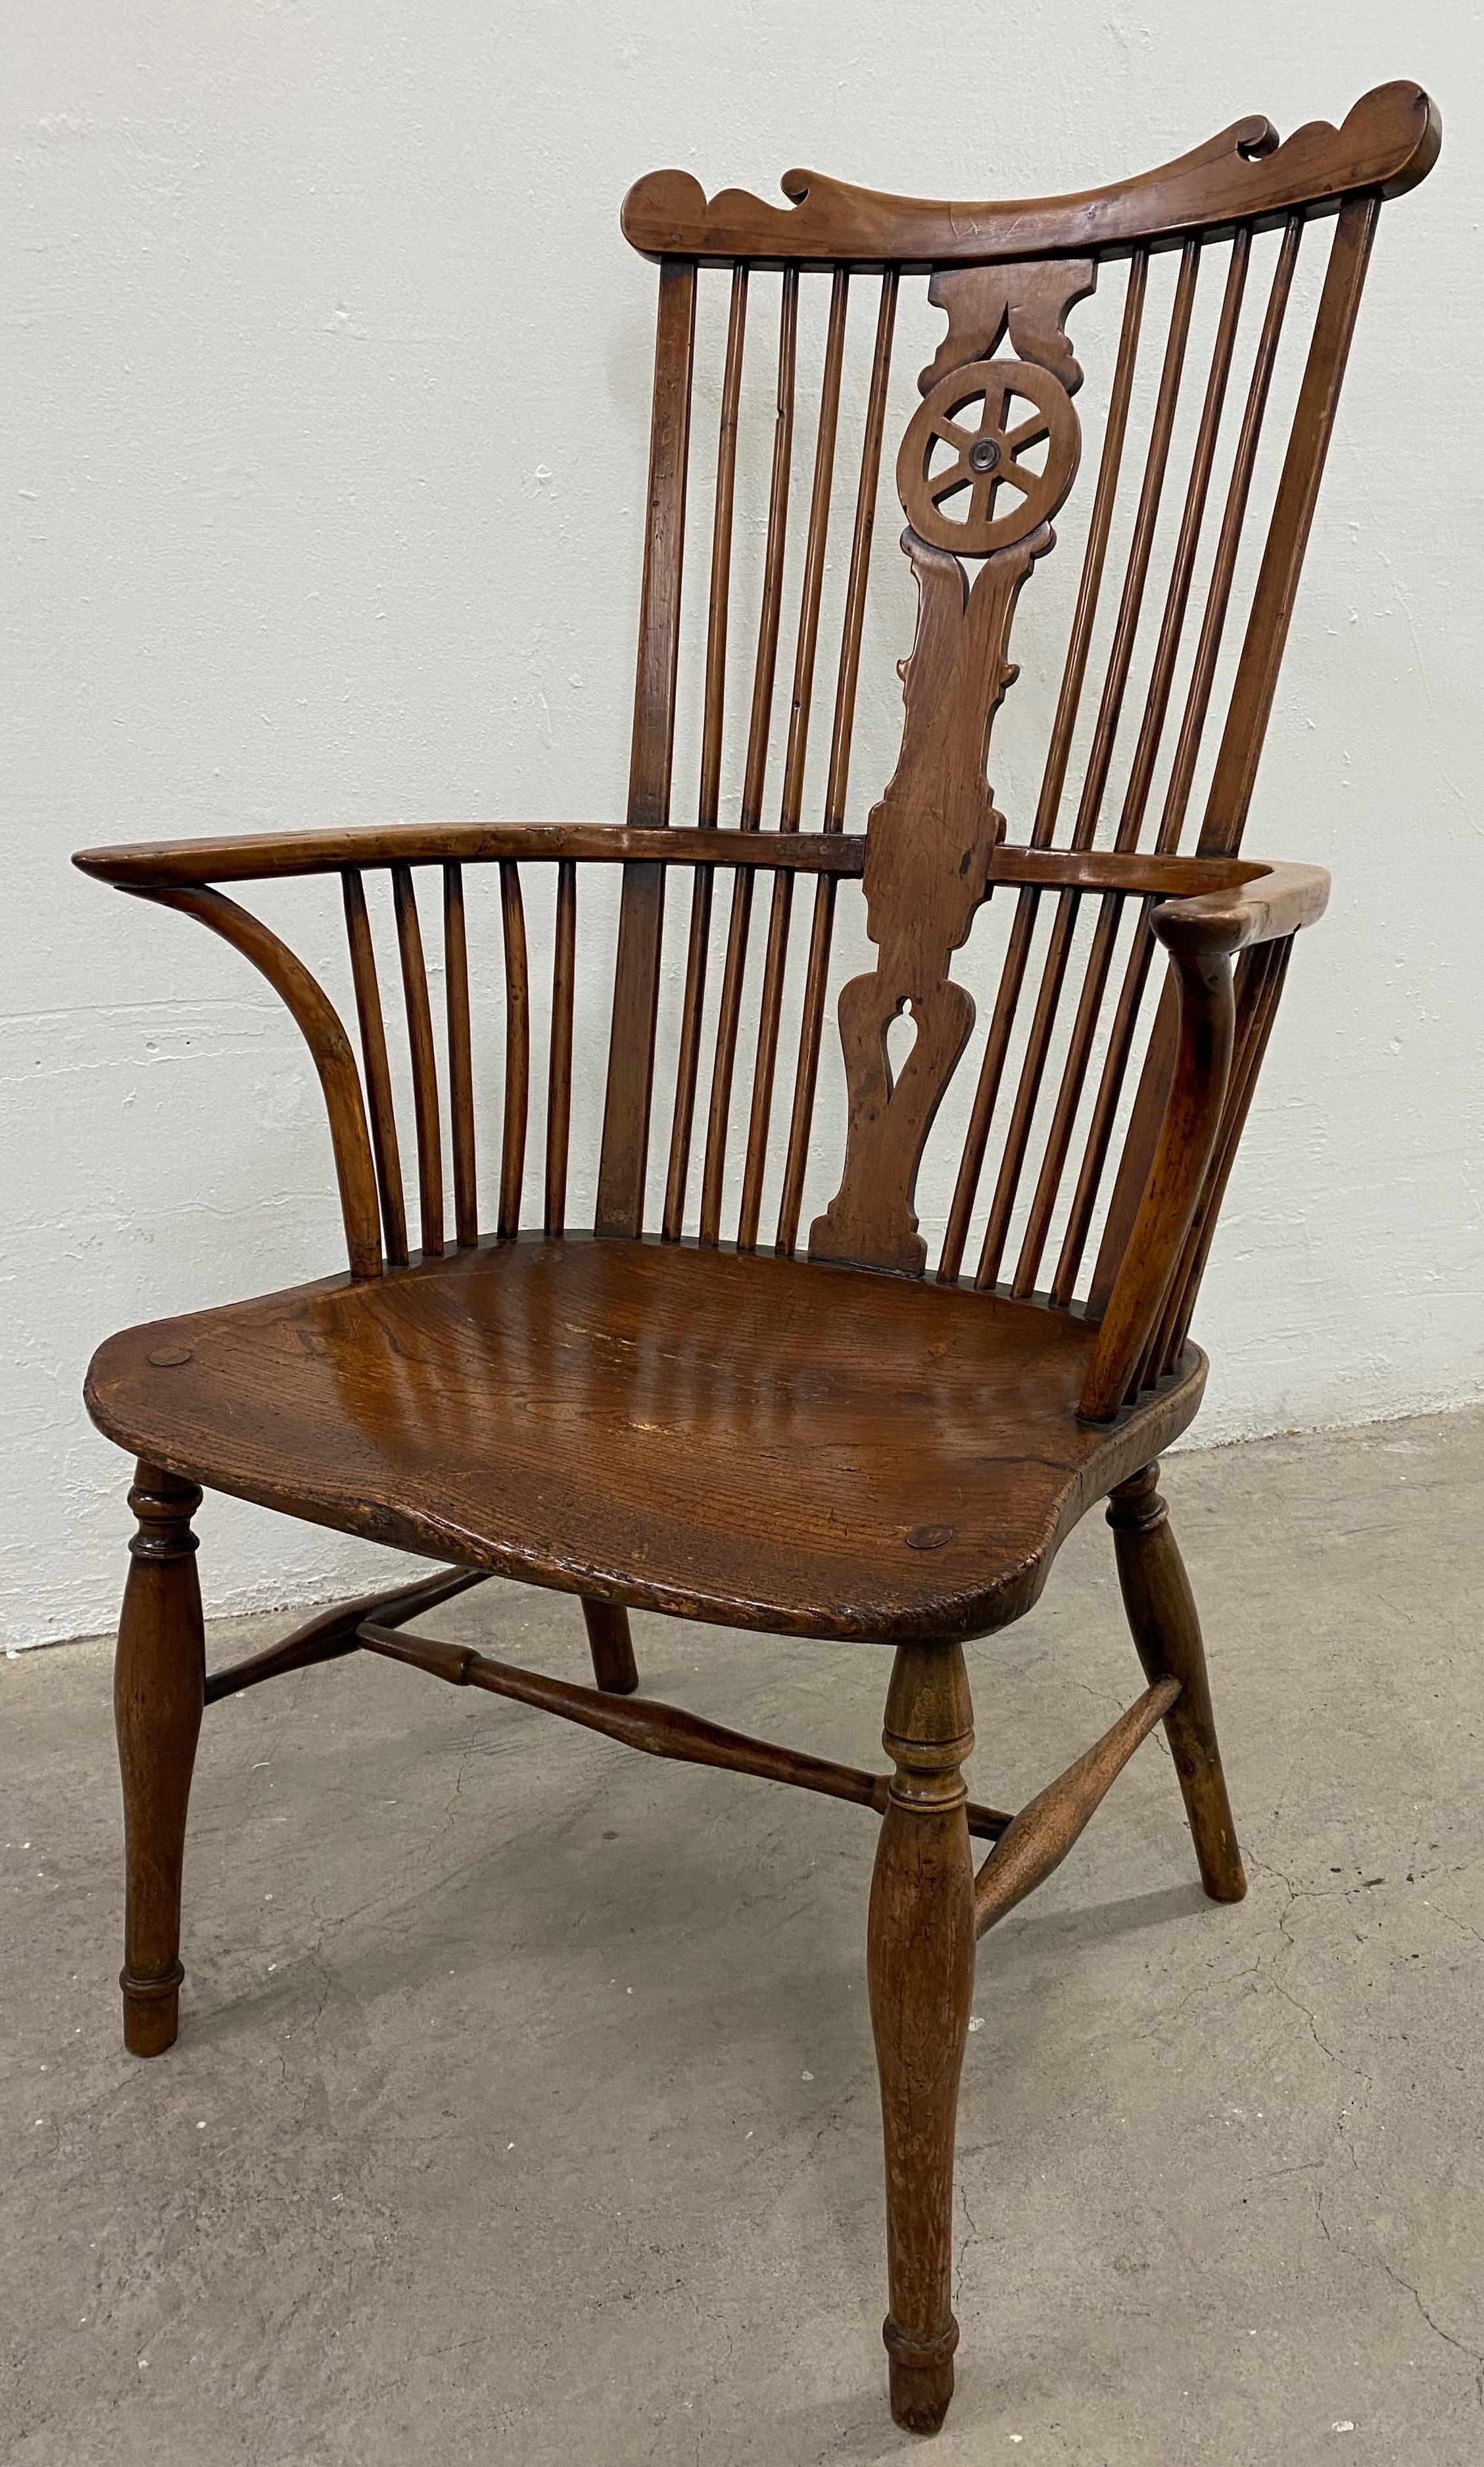 English 19th Century European Yew Wood High Back Windsor Armchair For Sale